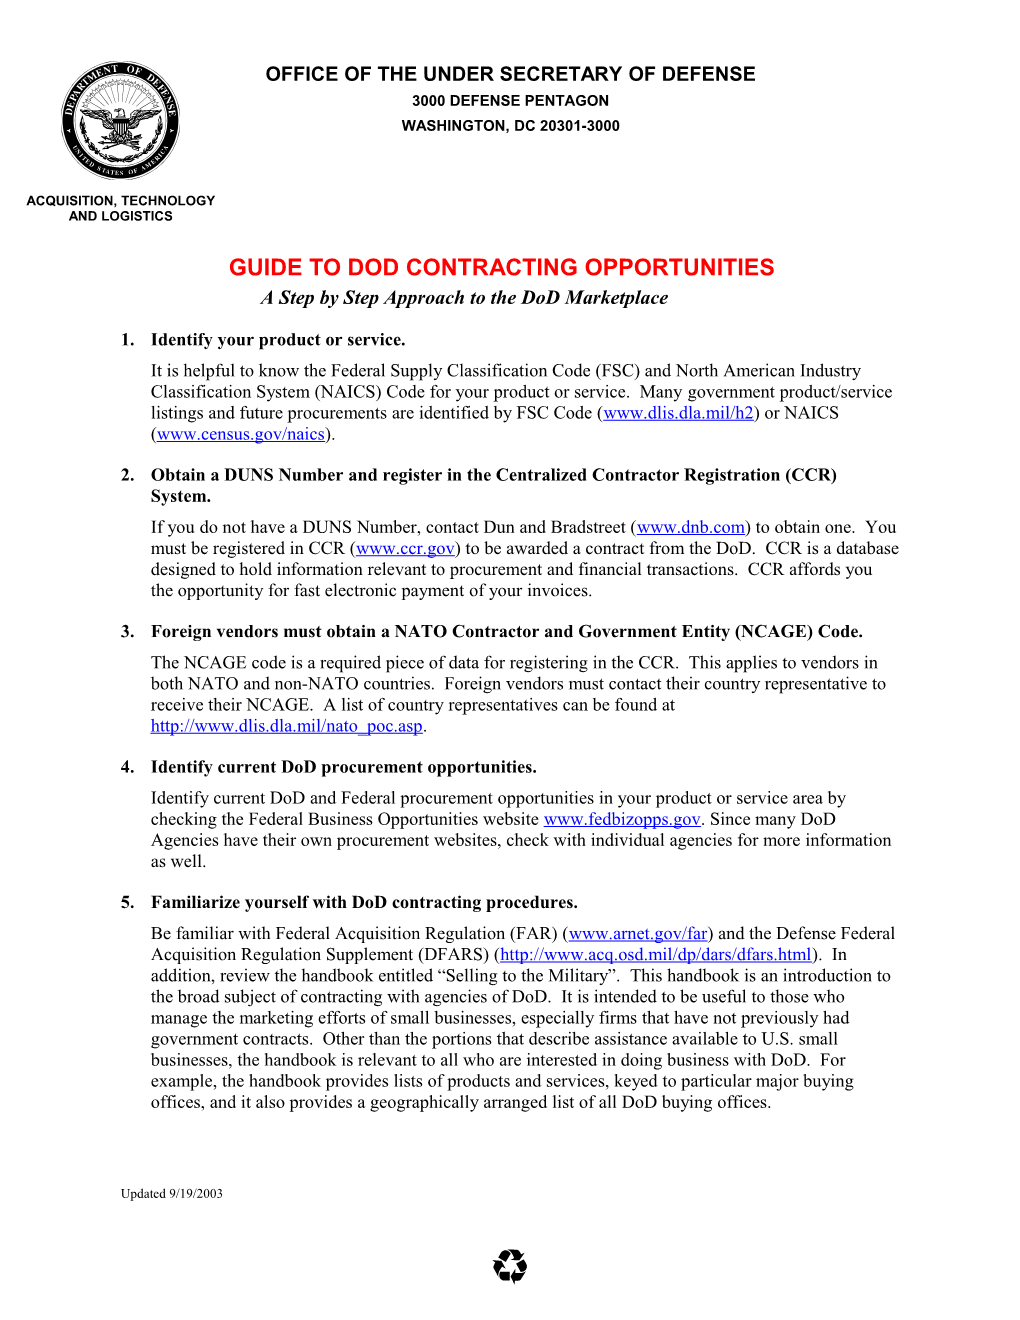 Guide to Dod Contracting Opportunities